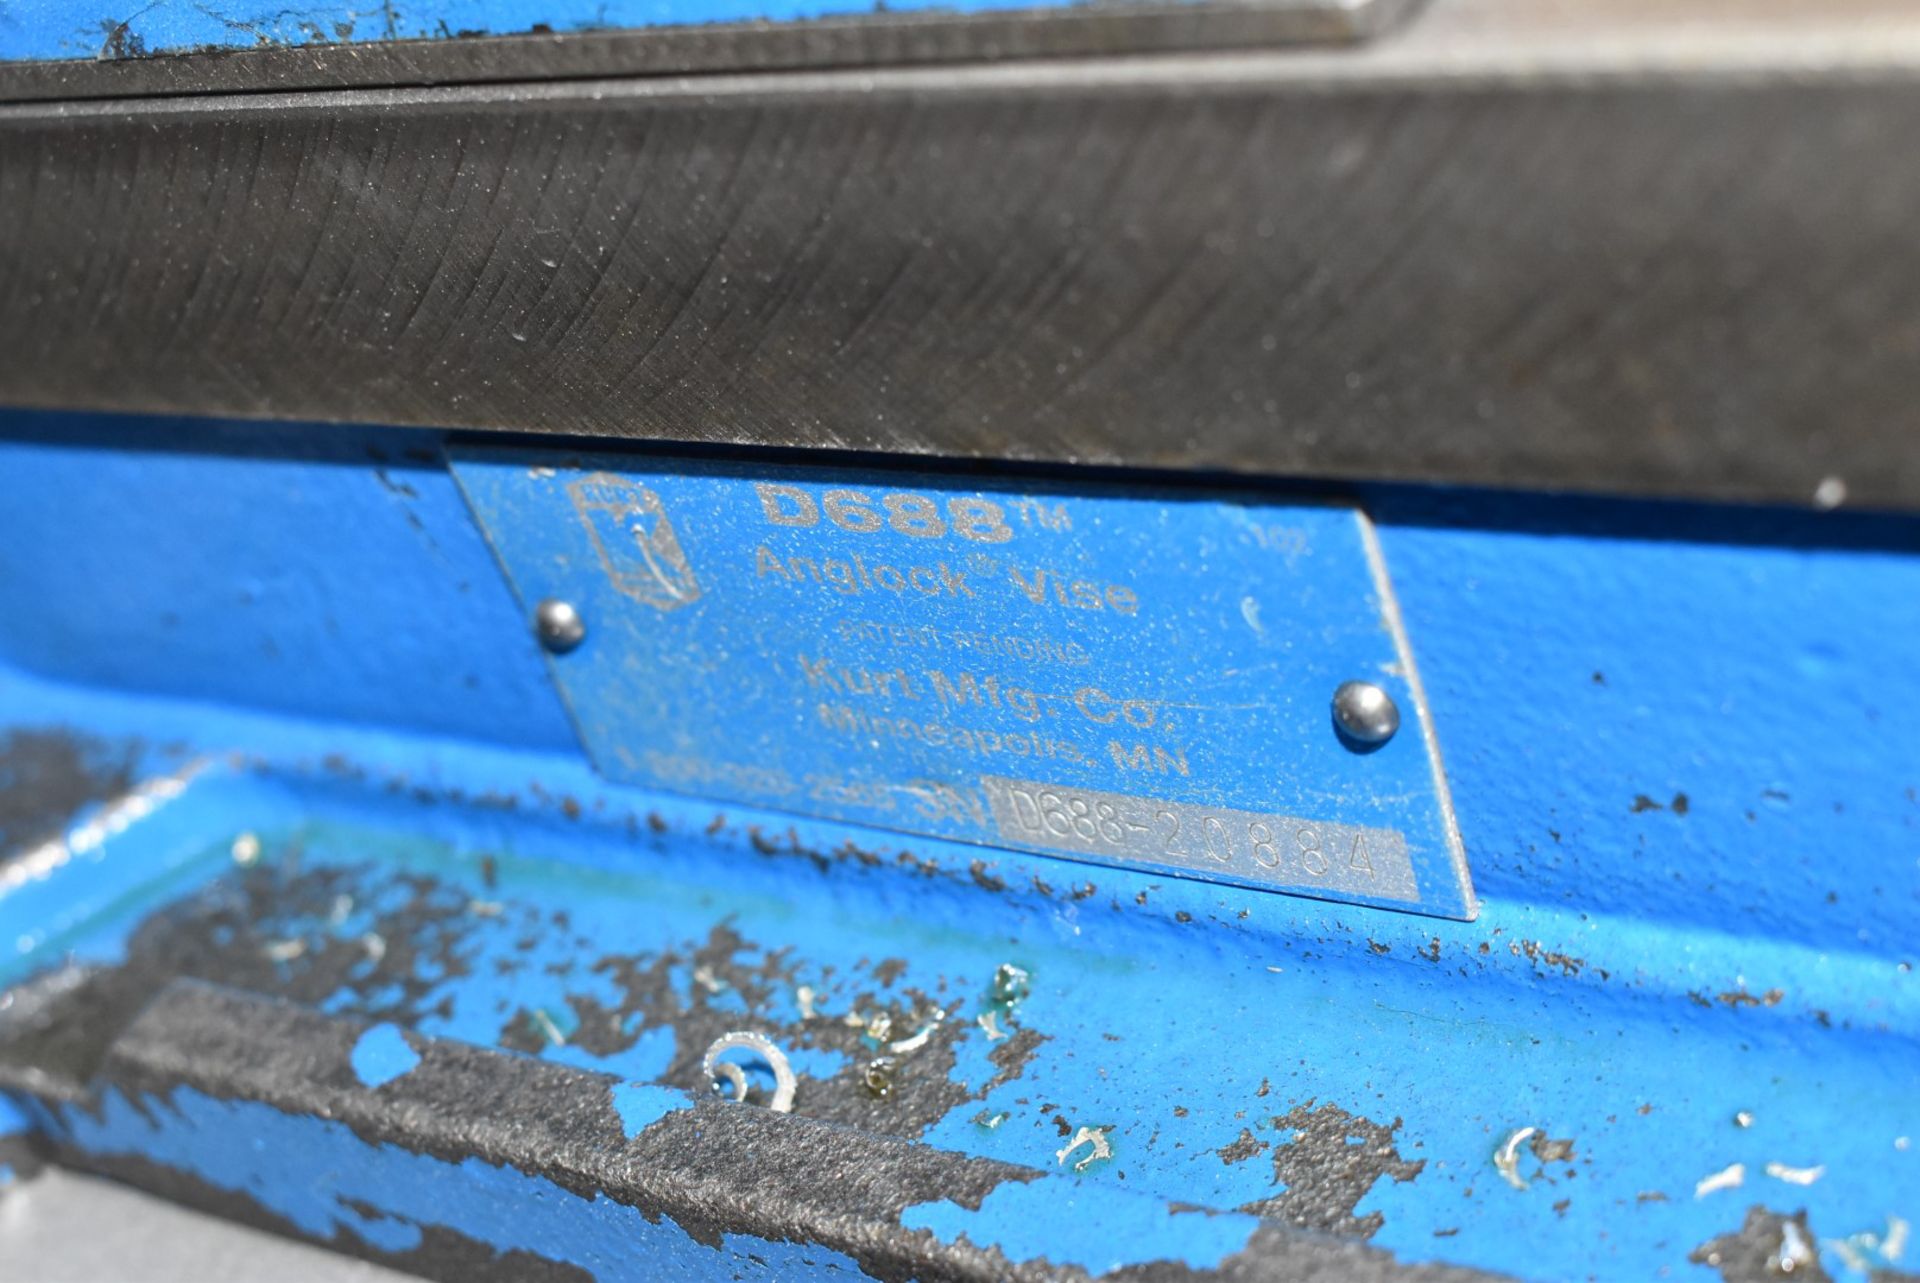 KURT 6" MACHINE VISE, S/N N/A [RIGGING FEE FOR LOT #117B - $25 USD PLUS APPLICABLE TAXES] - Image 2 of 2